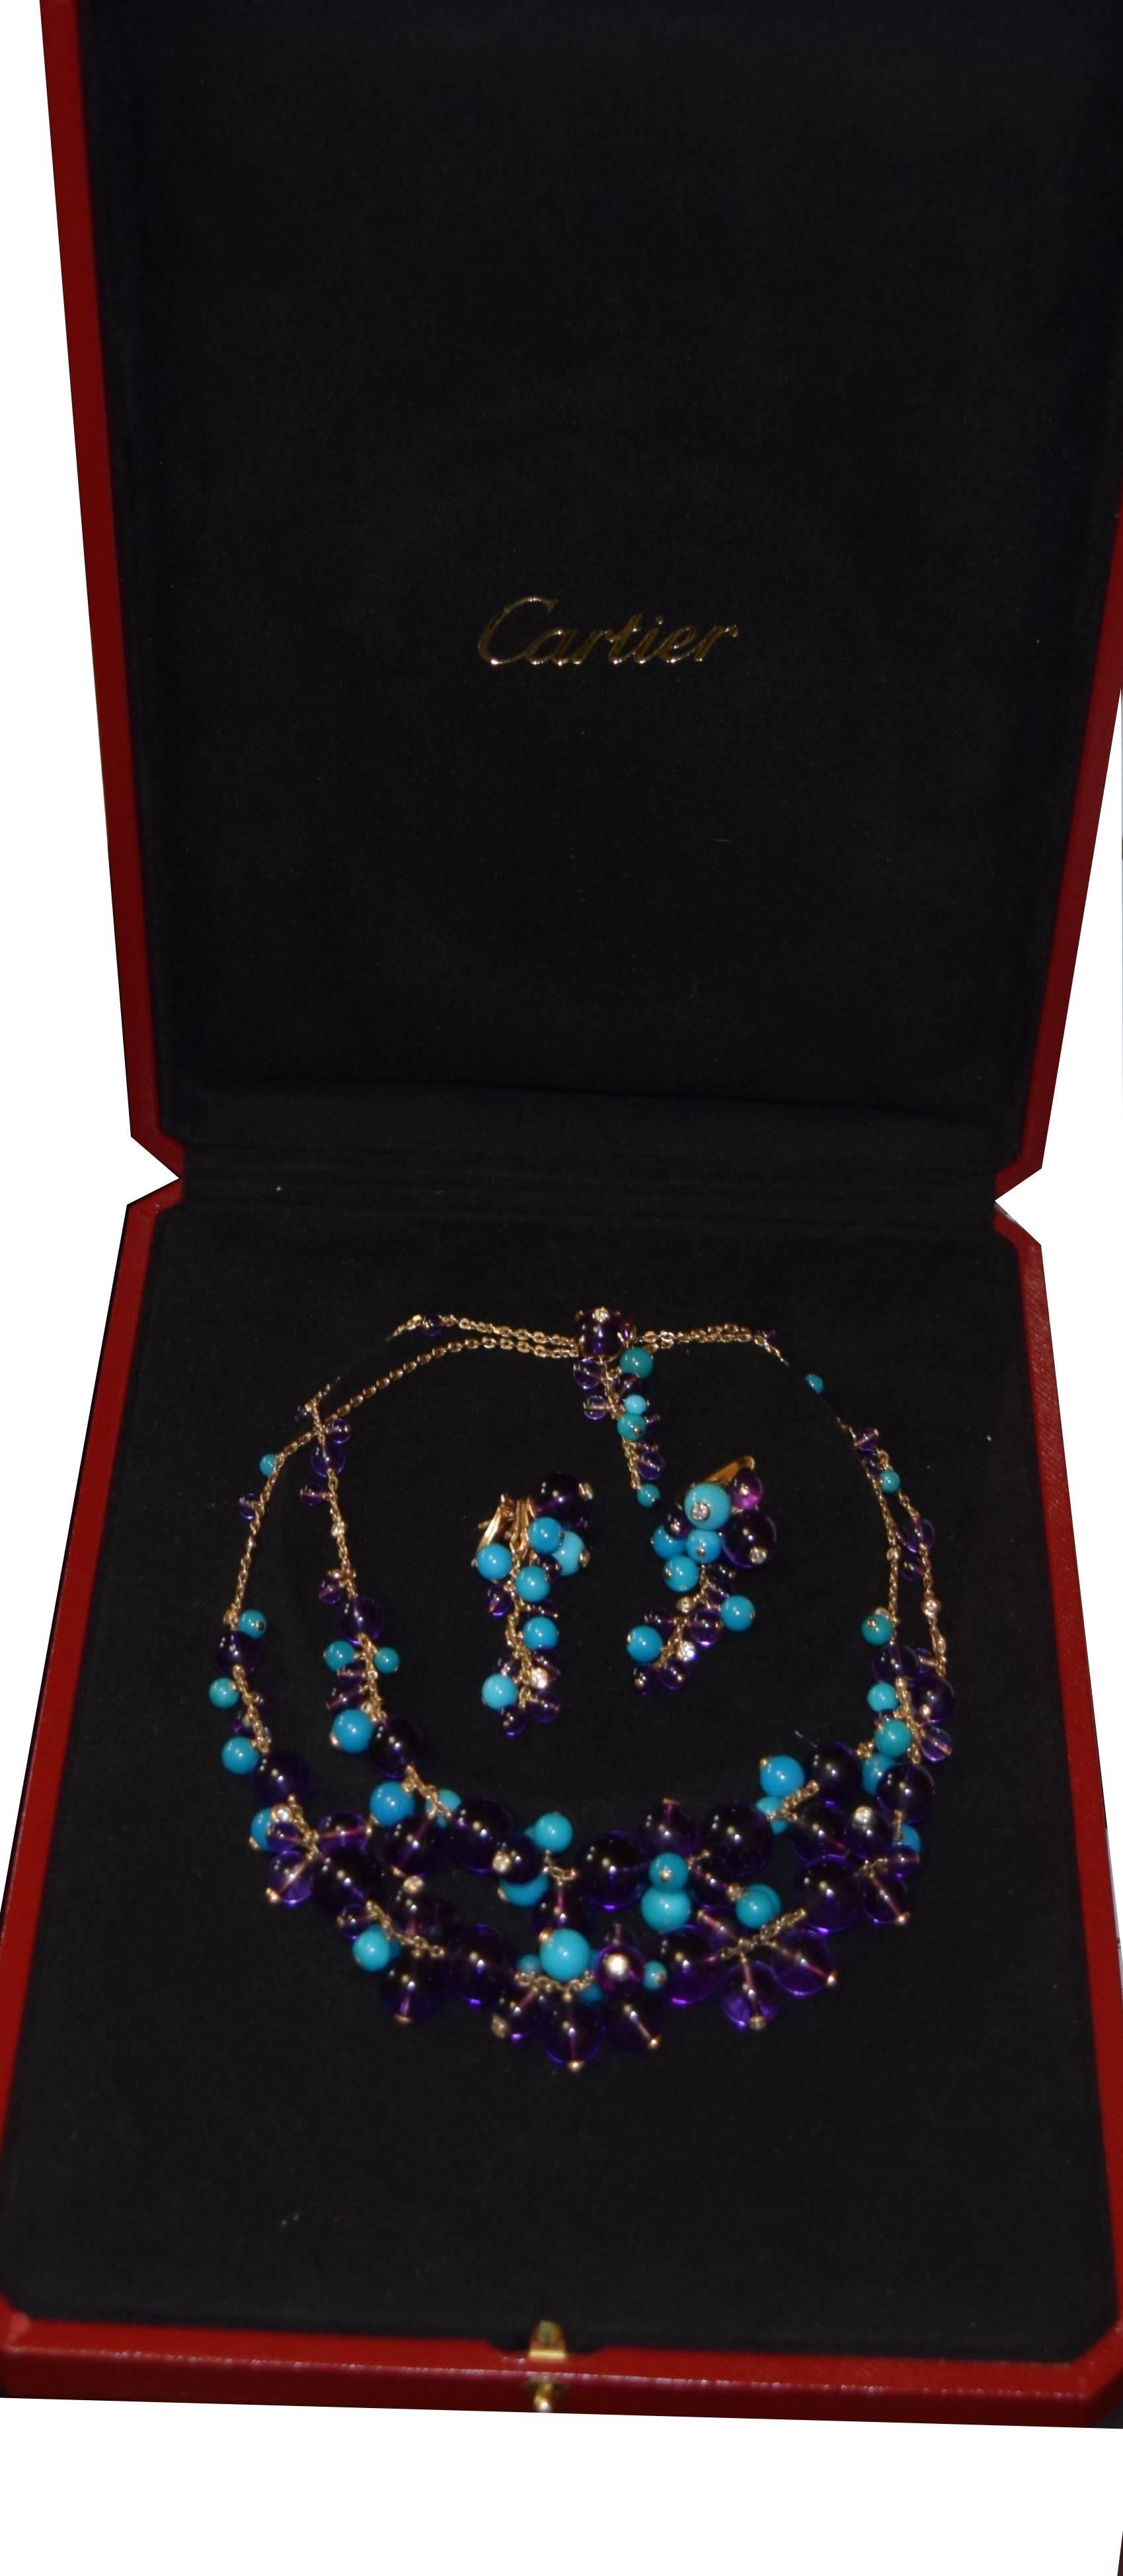 Elegant, timeless, captivating. 18k Yellow Gold Diamond Necklace & Earring Set with Turquoise & Amethyst Beads. Cartier

Designer: Cartier
Collection: Delices de Goa
Metal: Yellow Gold
Metal Purity: 18k
Stones: Turquoise ; Amethyst ;